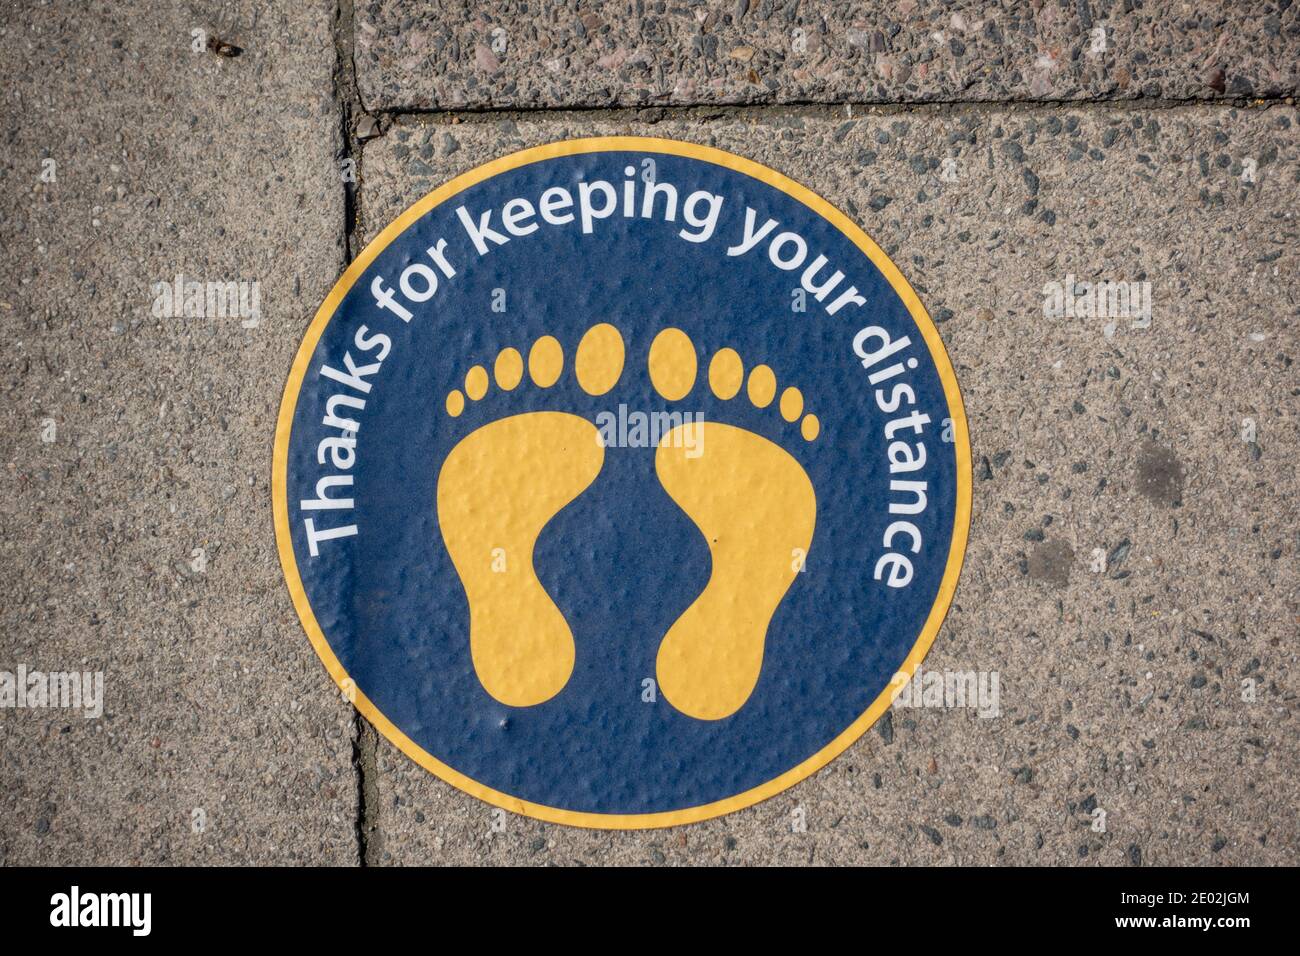 'Thanks for keeping your distance' sign on the ground reminding people to socially distance during the 2020 Covid-19 pandemic, Windsor, Berkshire, UK. Stock Photo